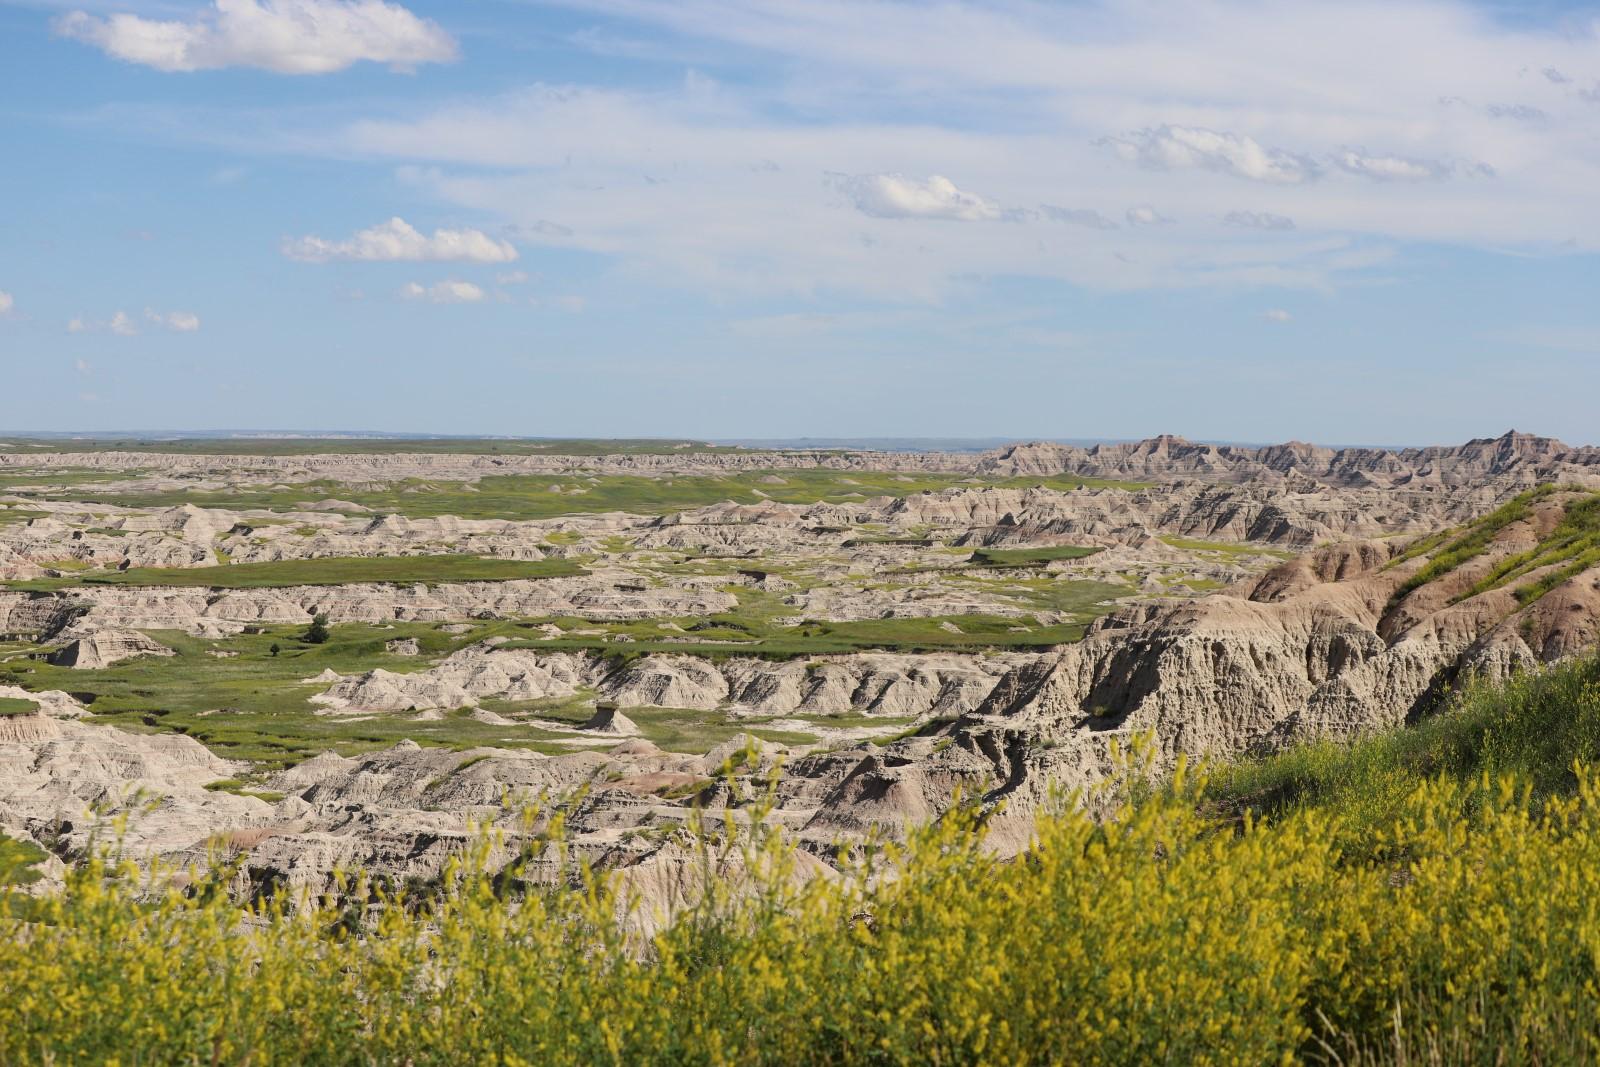 Jagged badlands buttes extended in horizon amid yellow flowers under a blue sky.